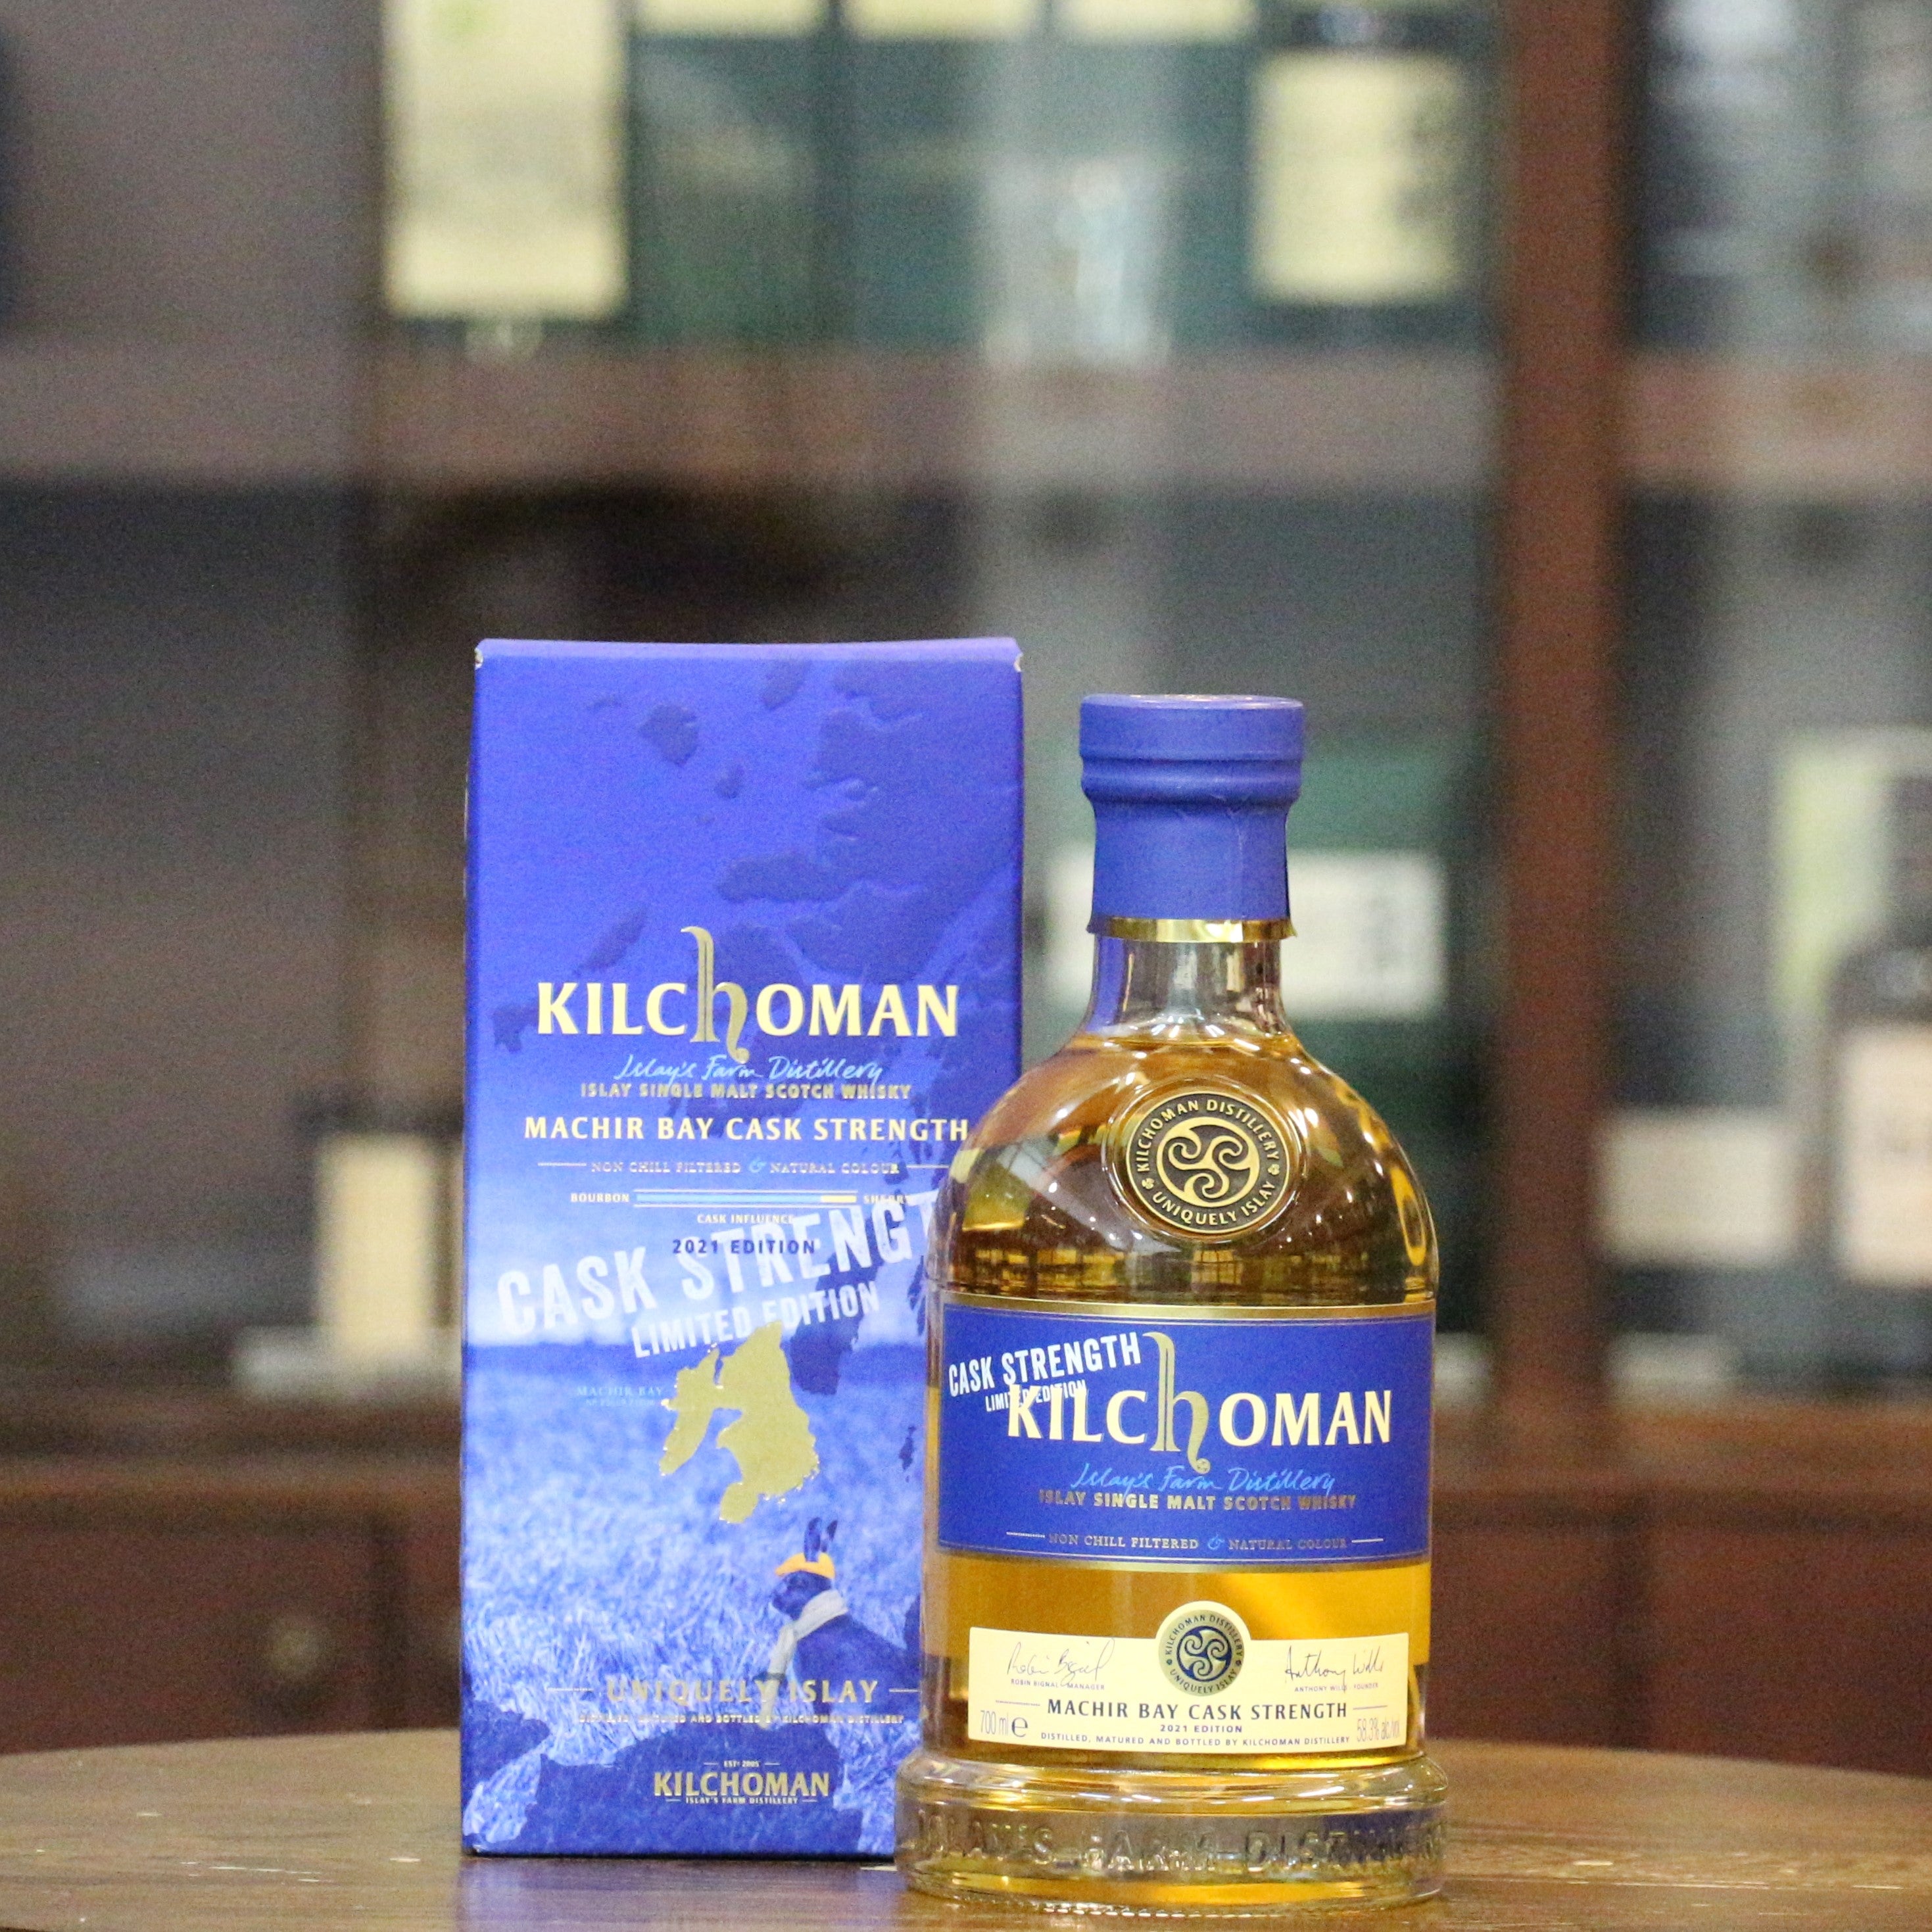 Kilchoman Machir Bay Cask Strength version,  a special edition released in 2021